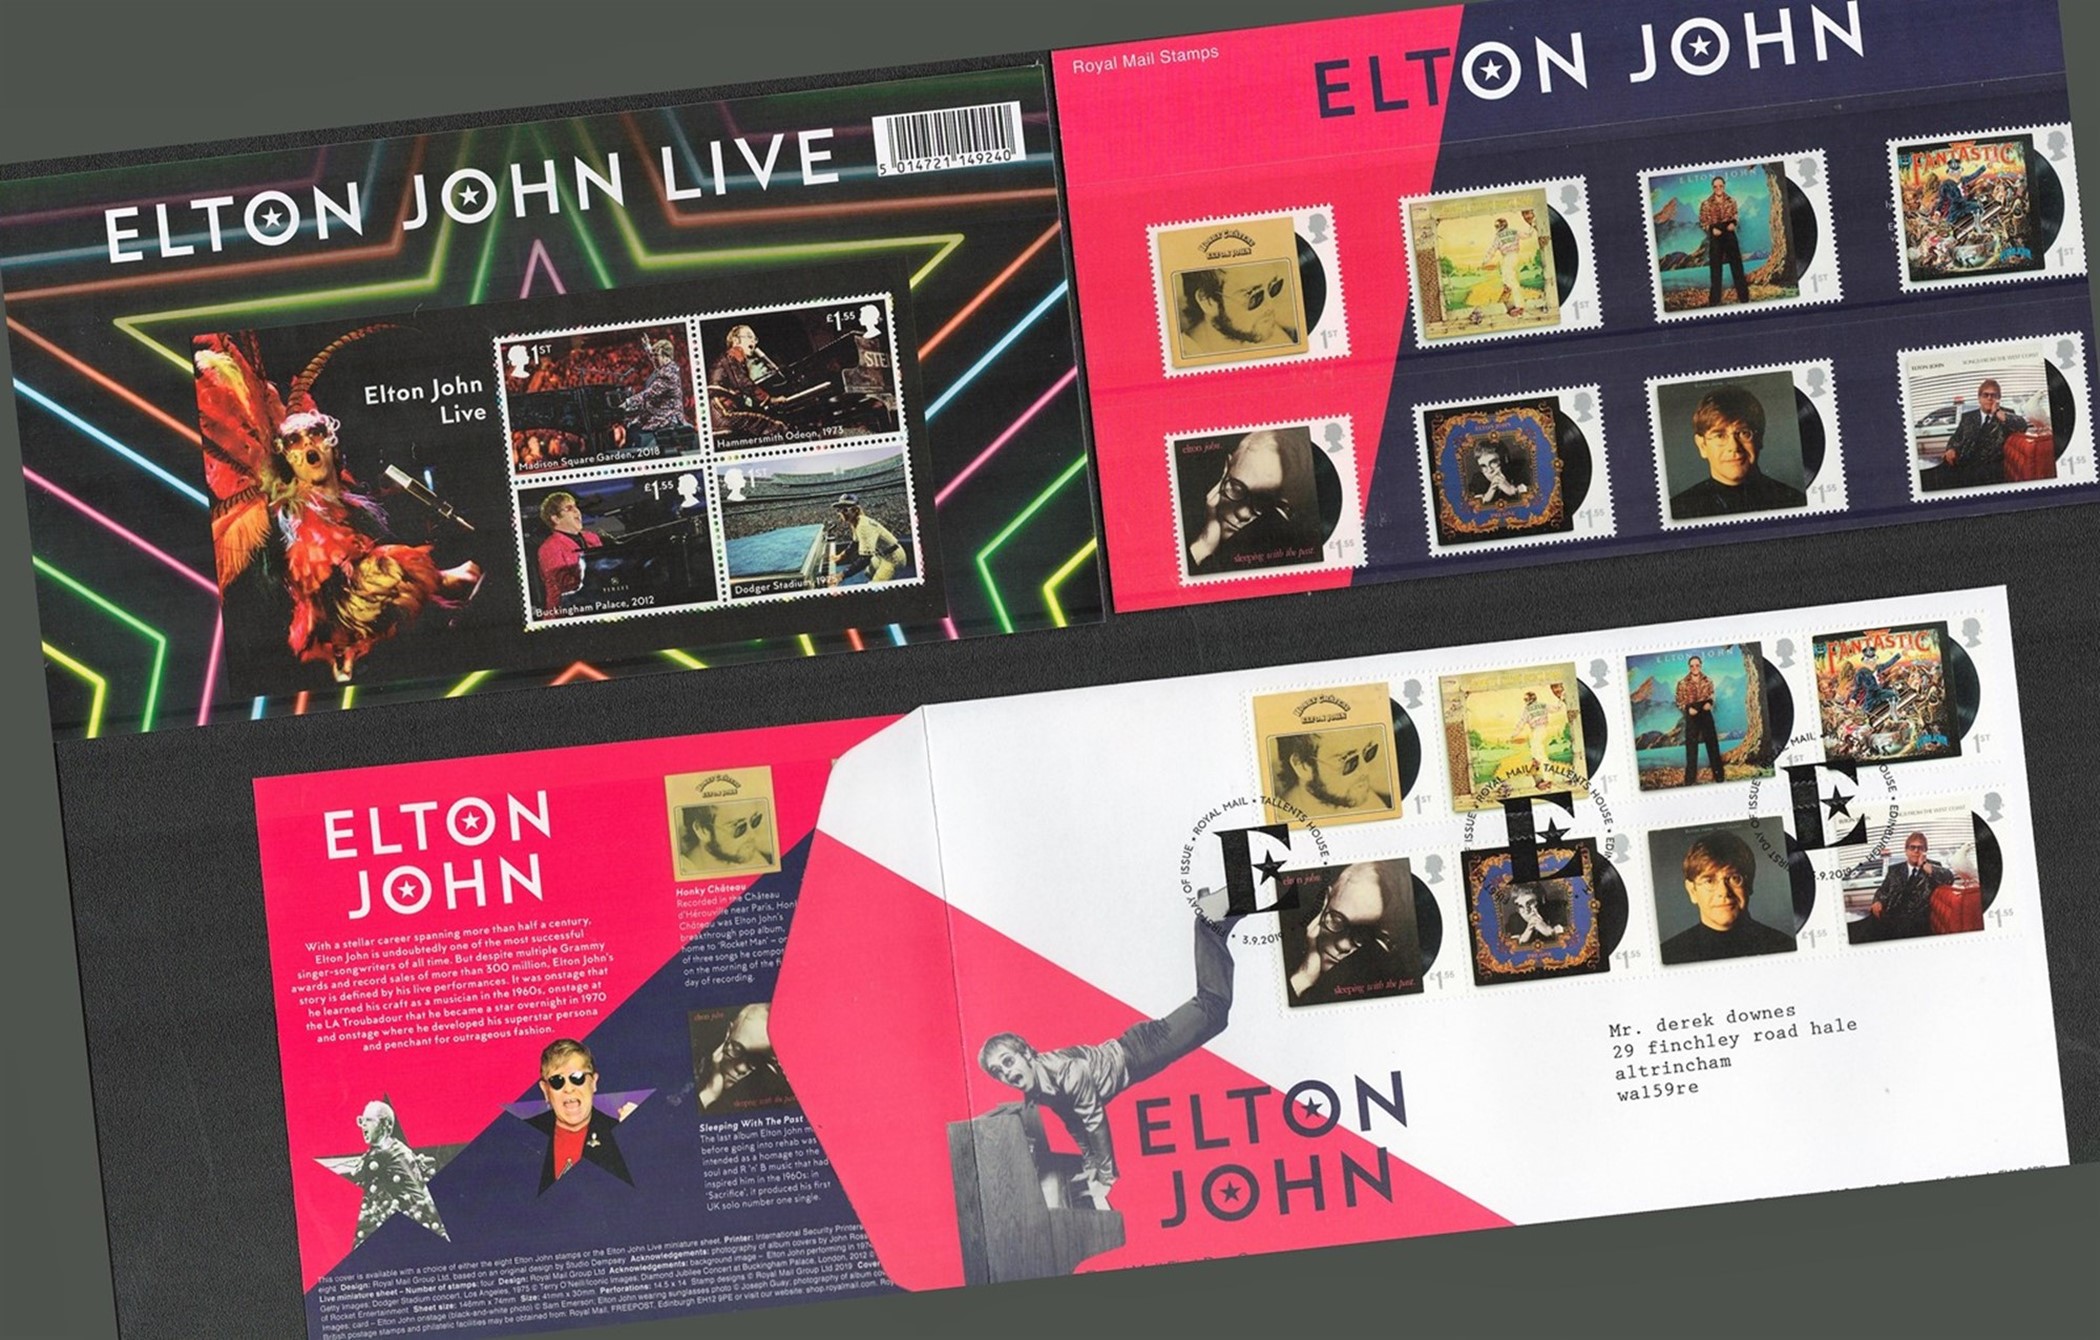 Elton John music stamp and FDC collection featuring 2 complete presentation packs showcasing 12